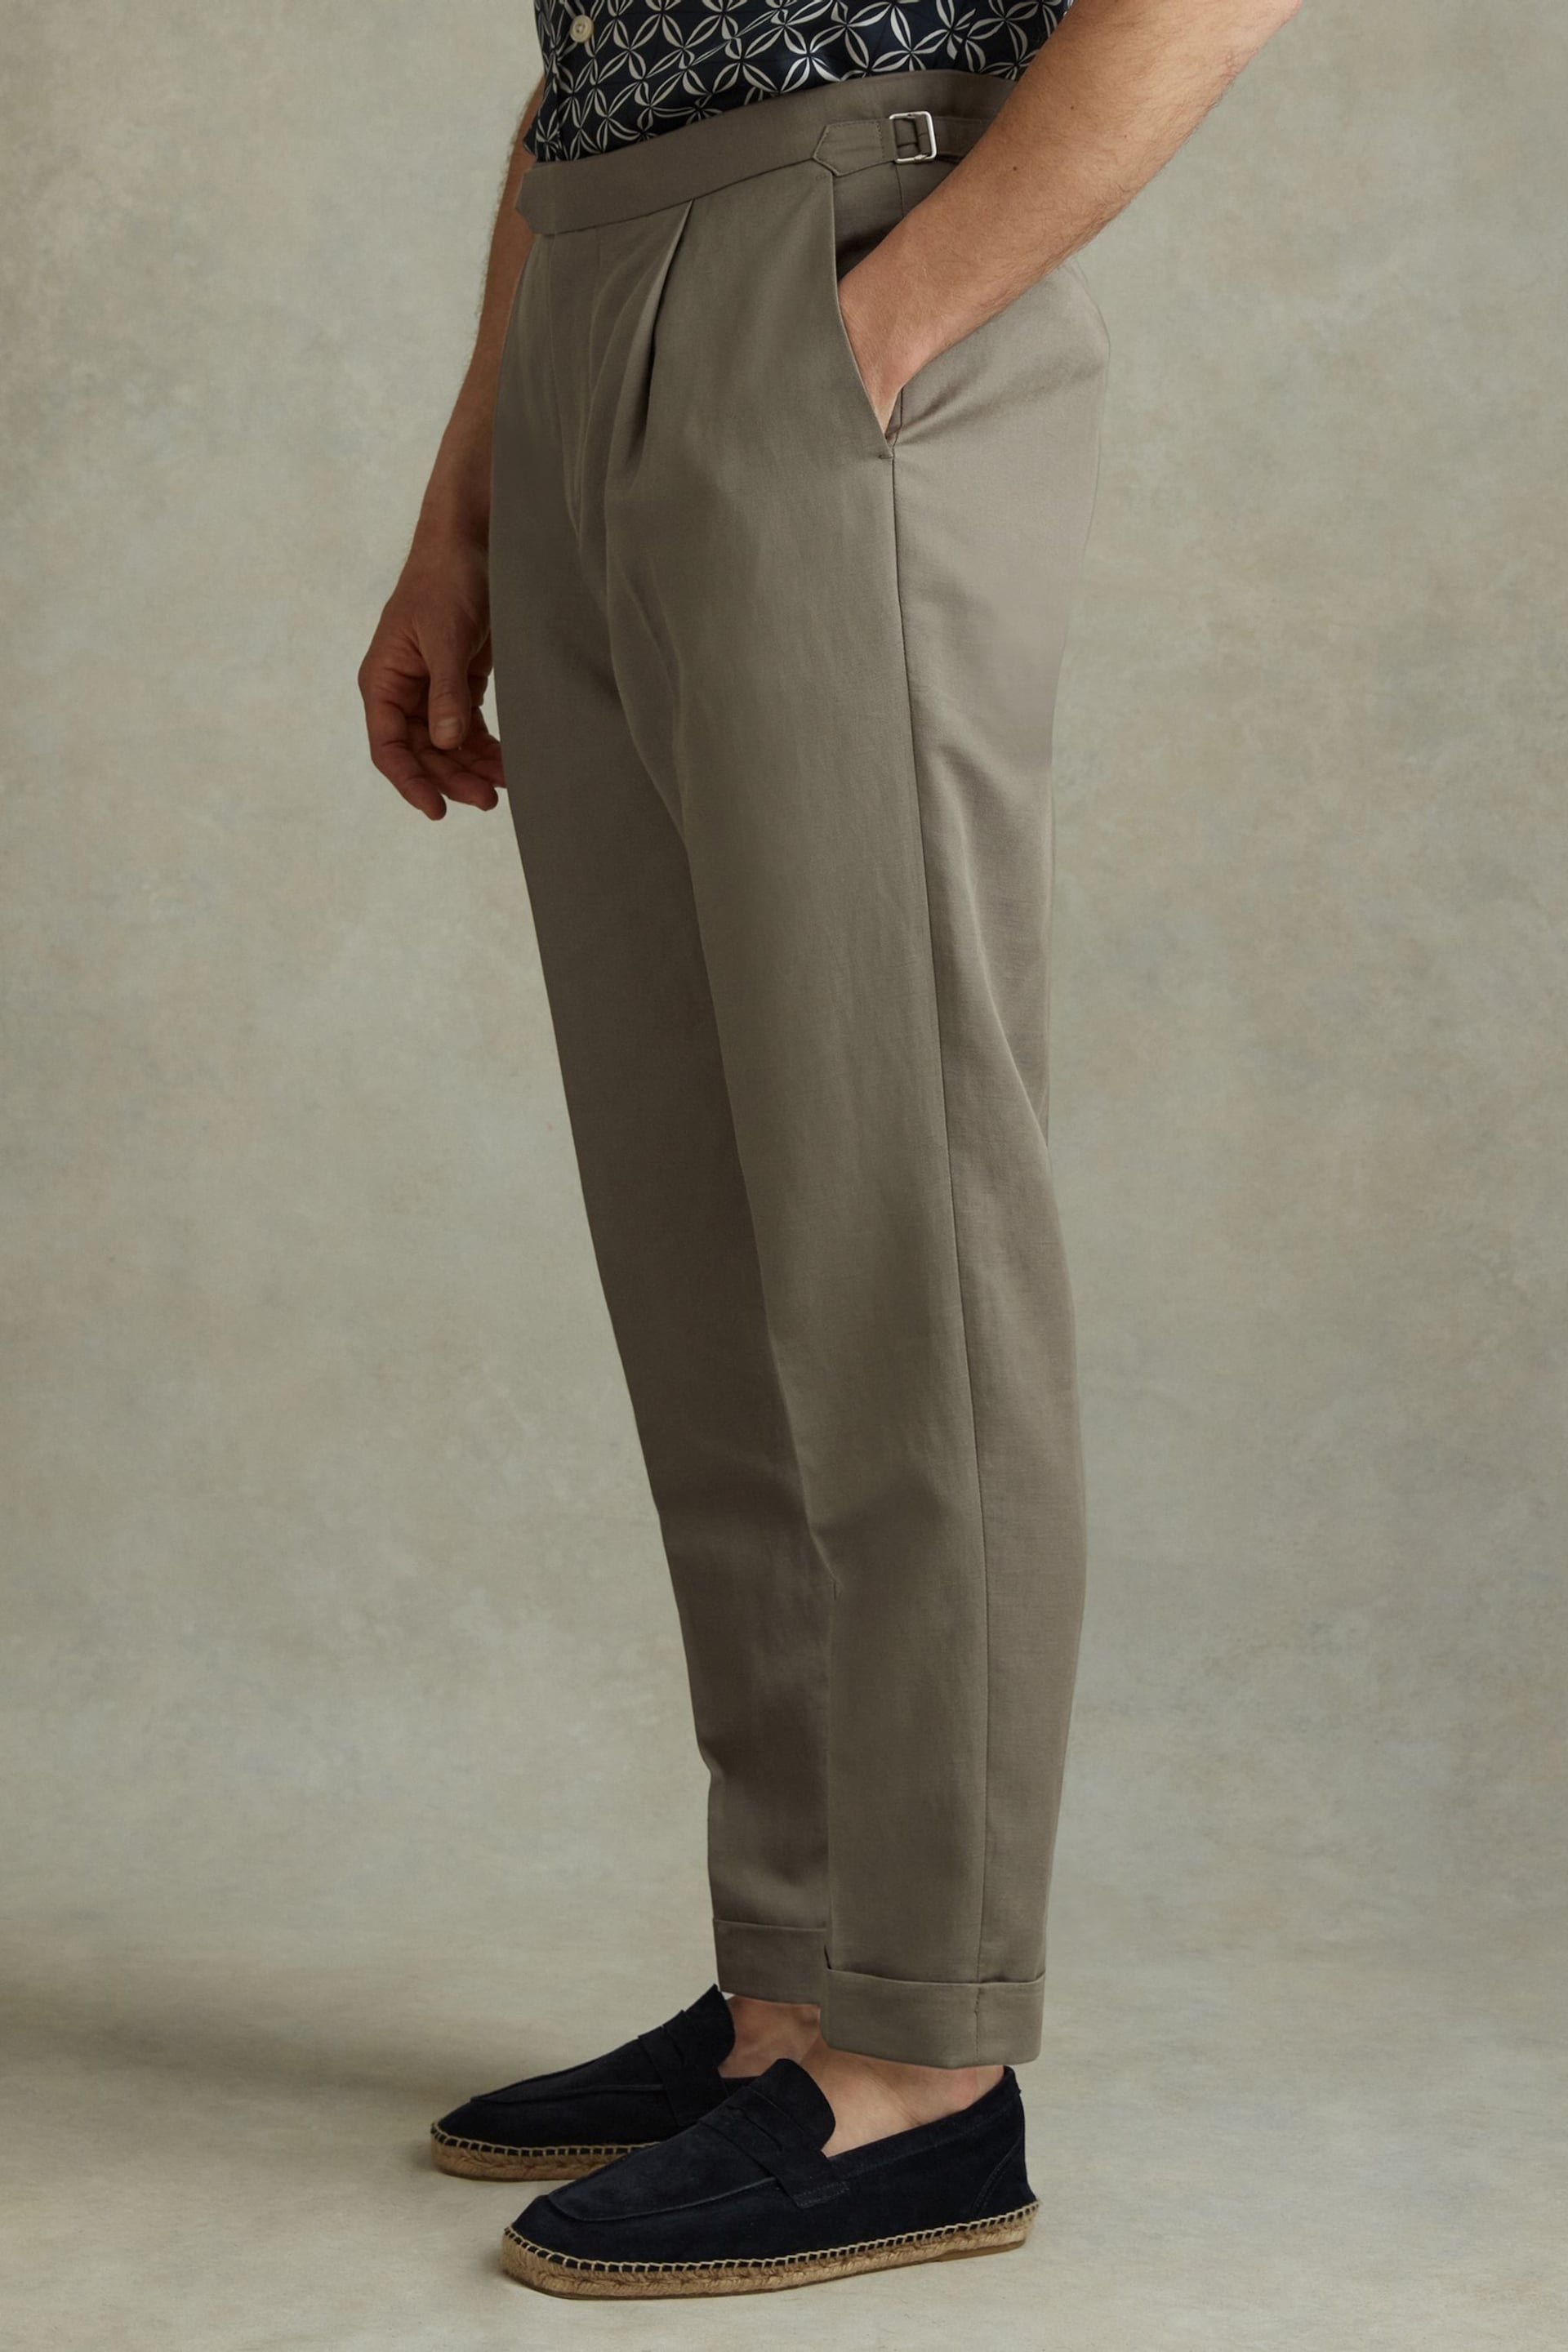 Reiss Light Khaki Com Relaxed Cropped Trousers with Turned-Up Hems - Image 3 of 5